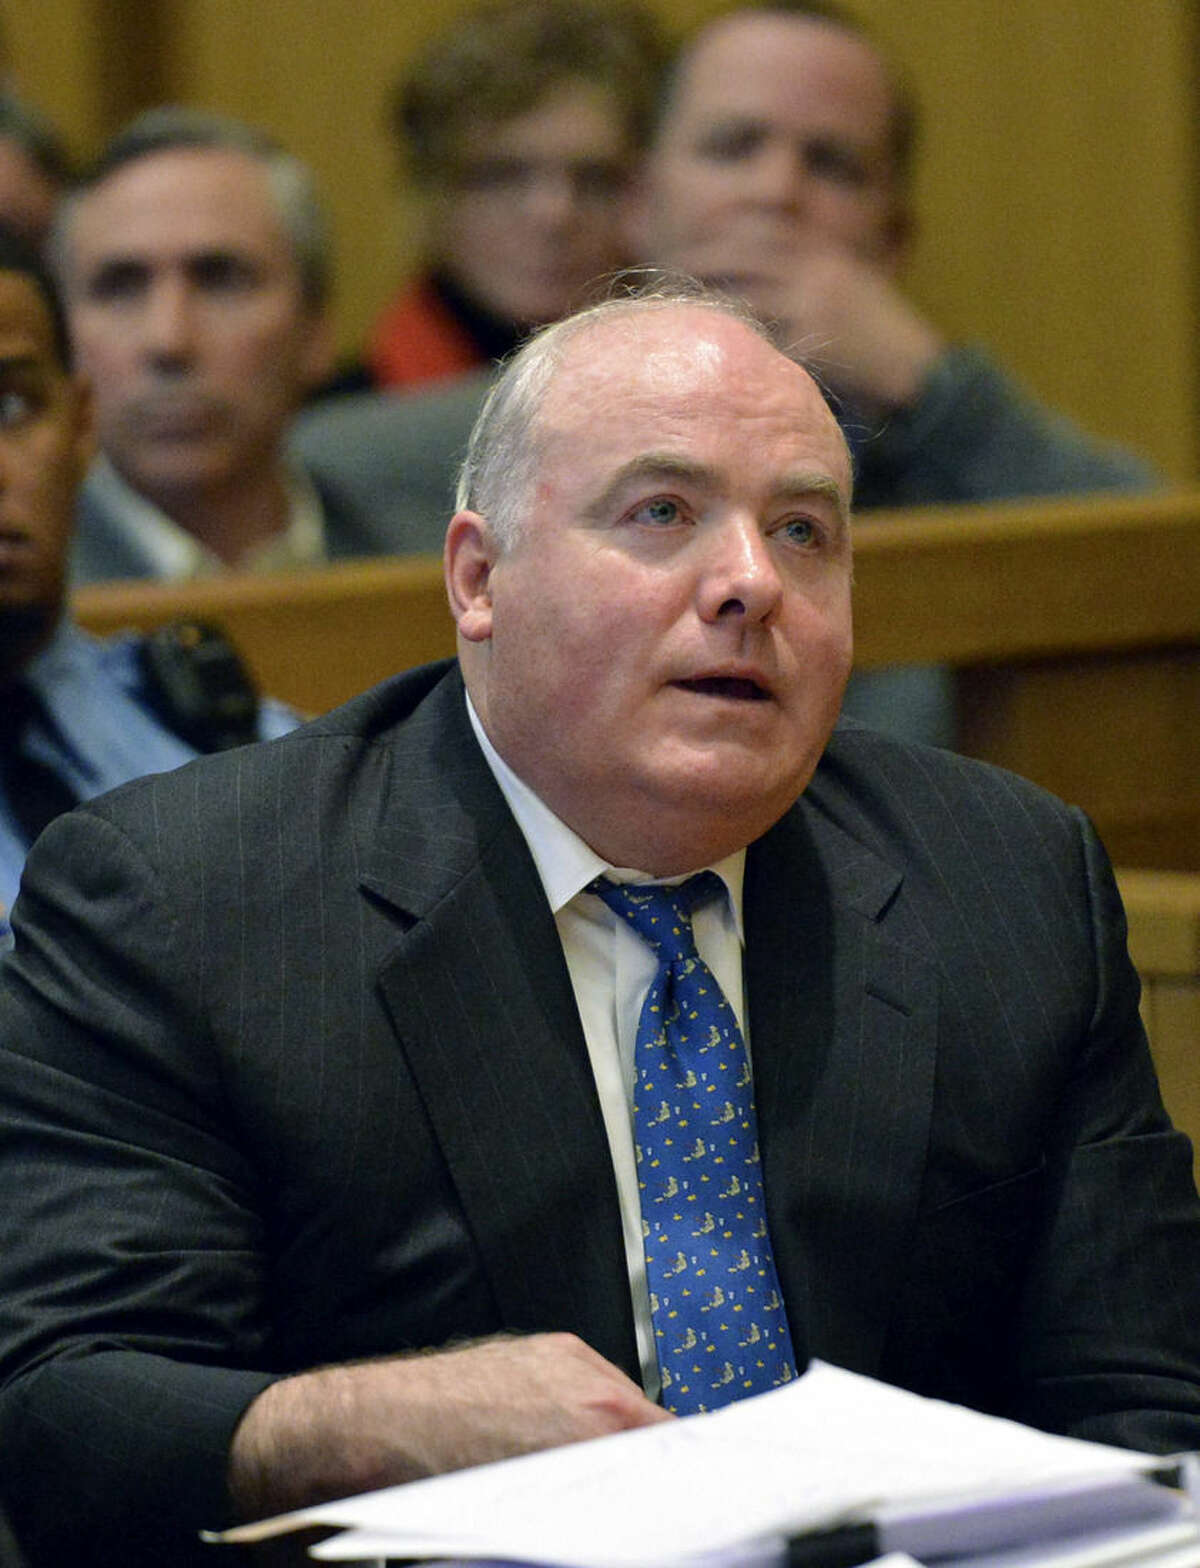 FILE - In this Nov. 21, 2013 file photo, Michael Skakel reacts to being granted bail during his bond hearing at Stamford, Conn., Superior Court. Skakel was convicted in 2002 of the October 1975 murder of Martha Moxley, but a judge granted a new trial in 2013 saying his trial attorney, Michael Sherman, failed to adequately represent him. Prosecutors filed an appeal Friday, Aug. 8, 2014 and said the judge was wrong to grant a new trial, rejecting his conclusion that Skakel's trial attorney should have focused more on his brother Thomas Skakel. (AP Photo/The Stamford Advocate, Bob Luckey, Pool, File)